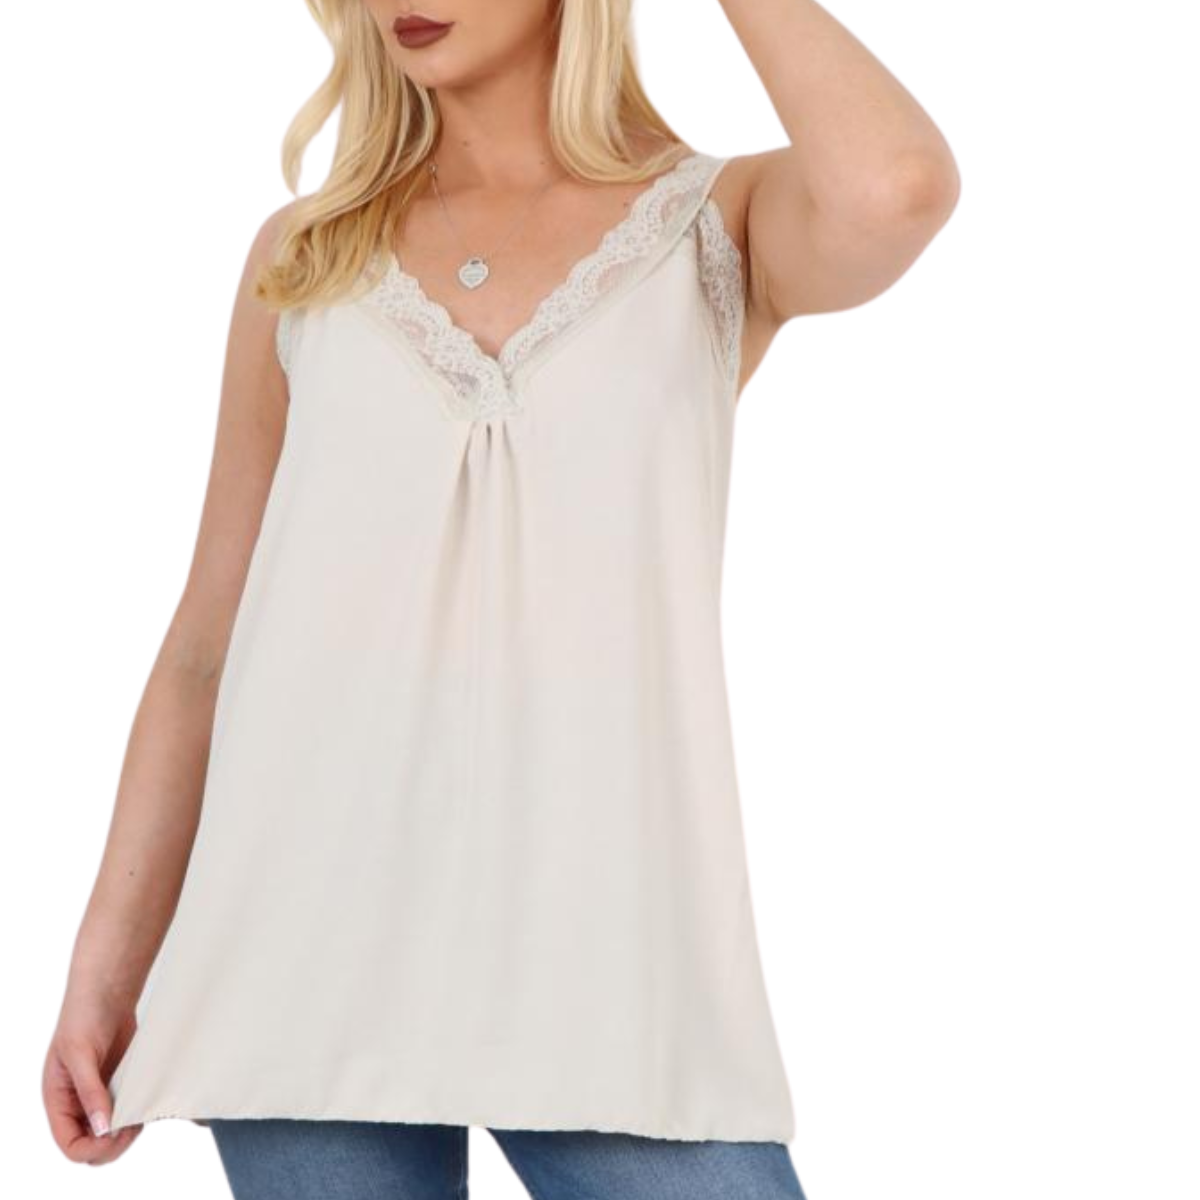 LACE EDGED SLEEVELESS LOOSE FITTING BLOUSE / VEST TOP